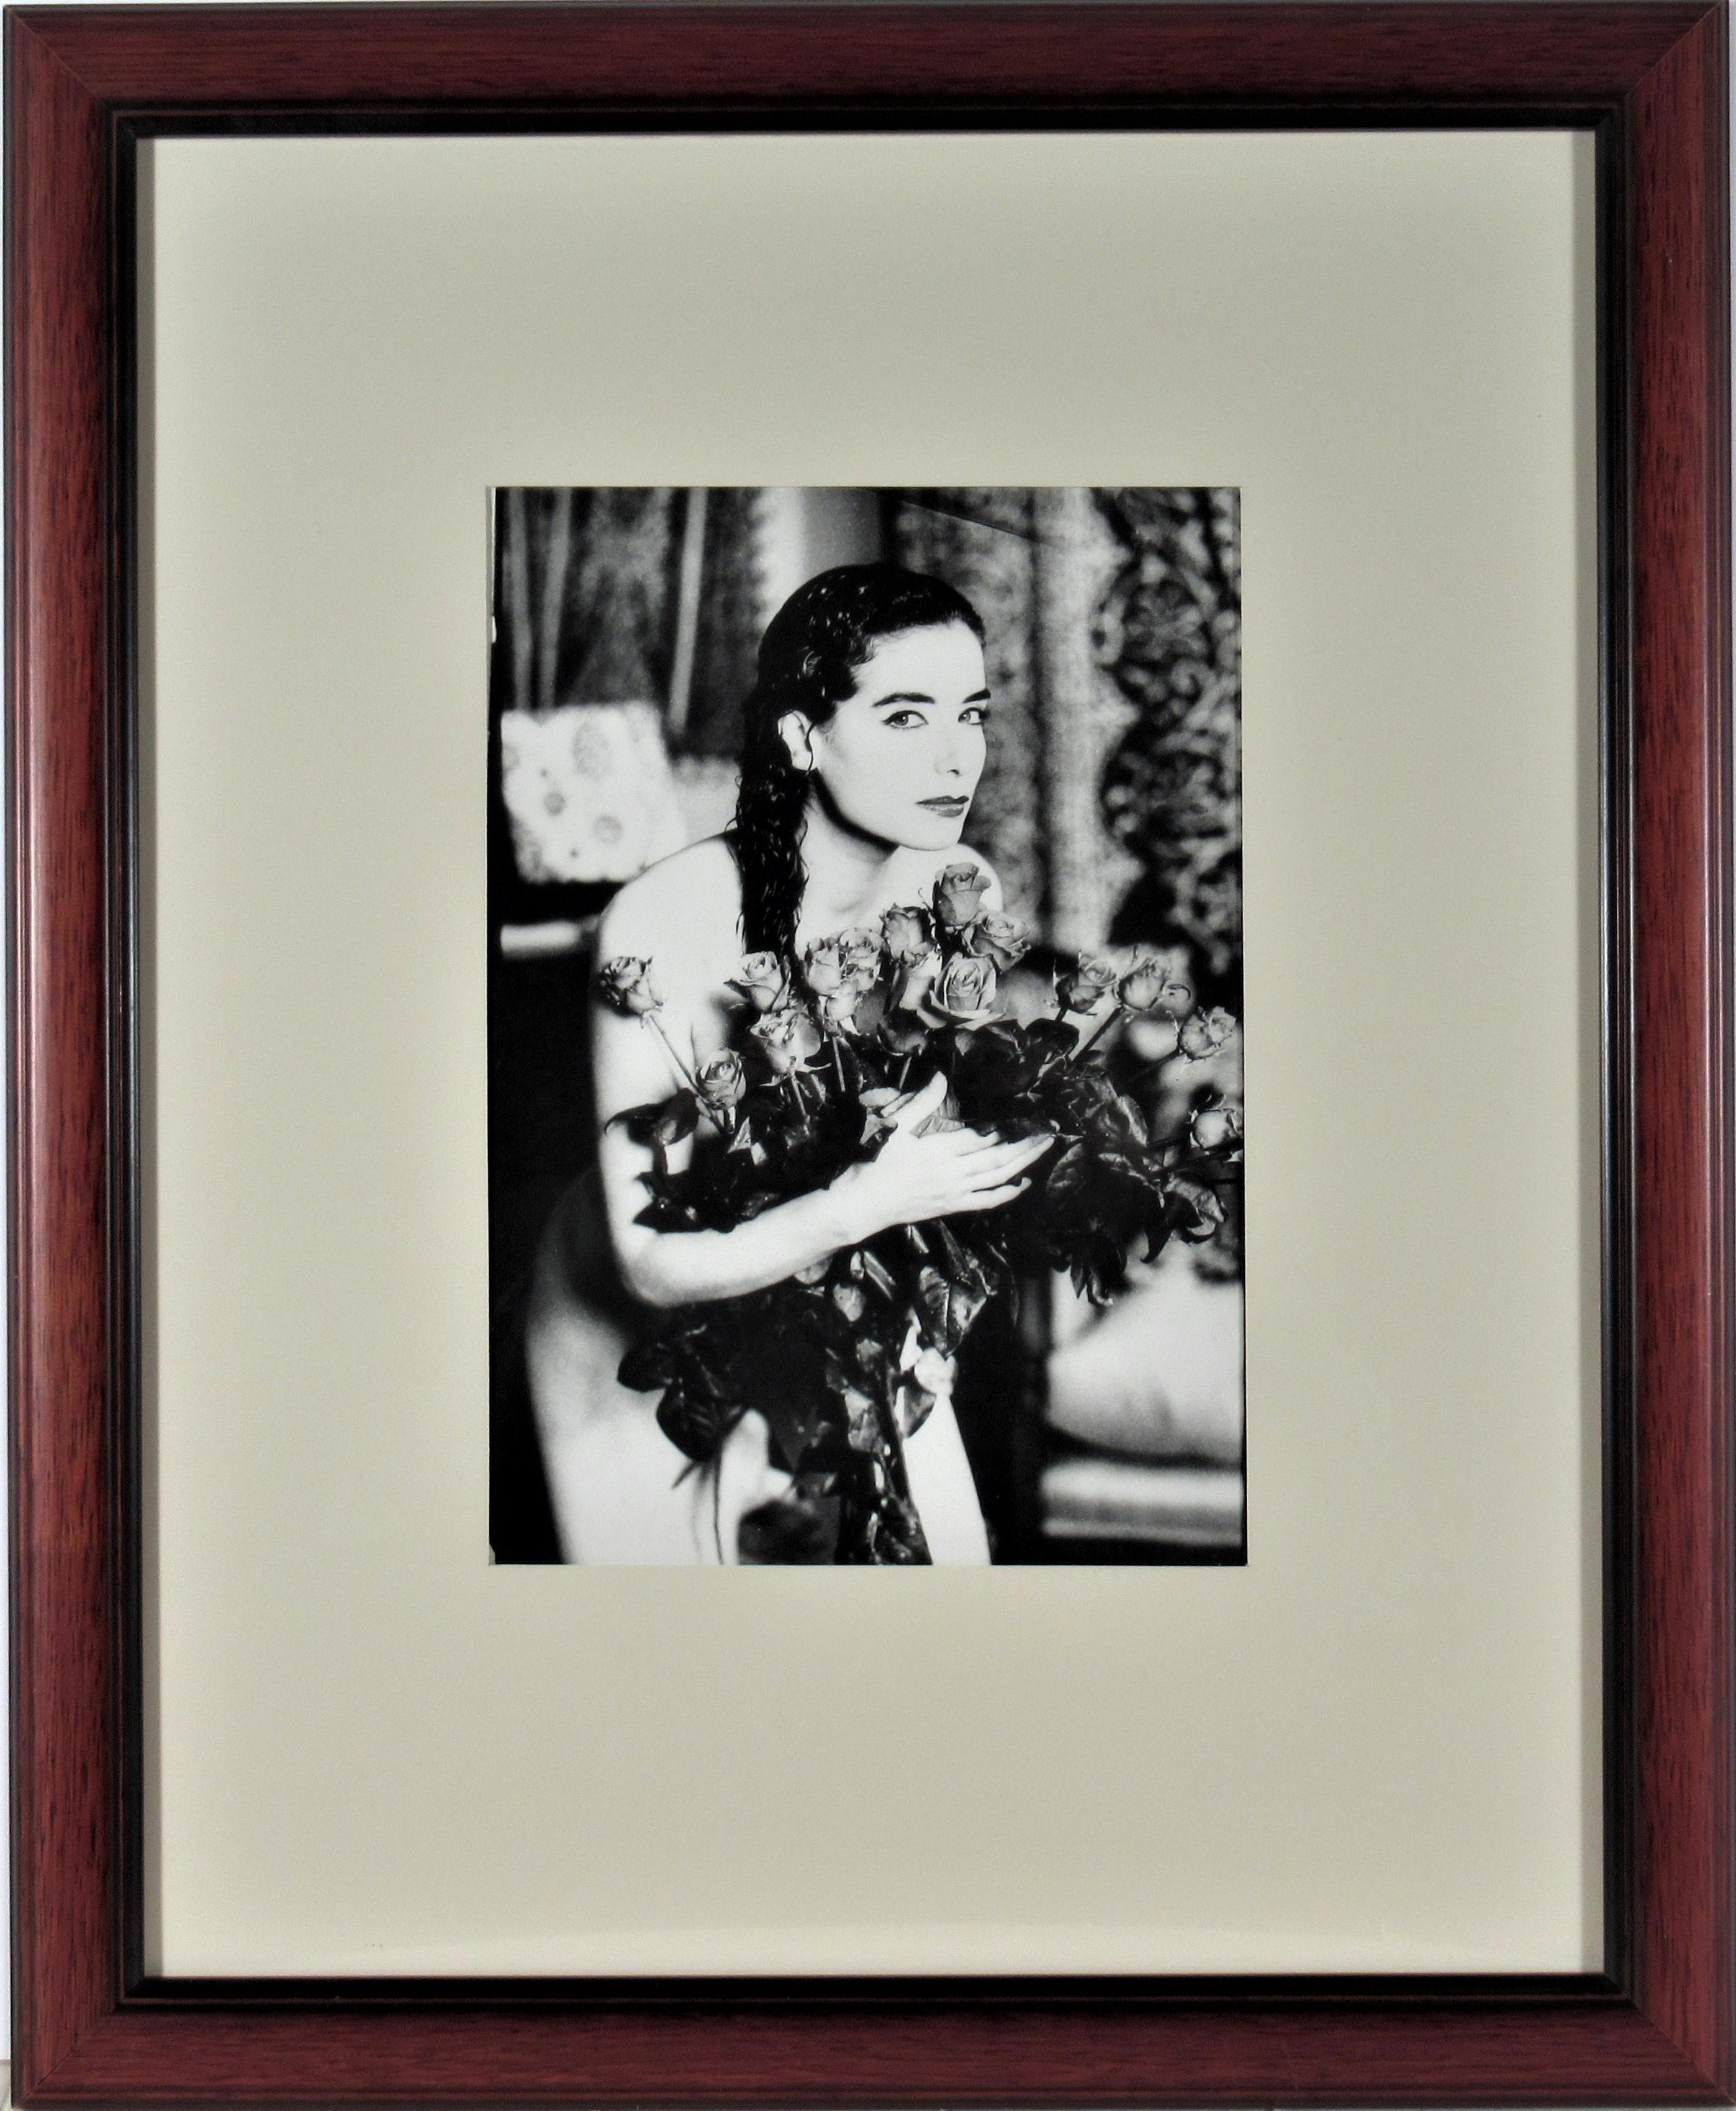 Michael Andreas Russ Black and White Photograph - Untitled, Woman with Flowers